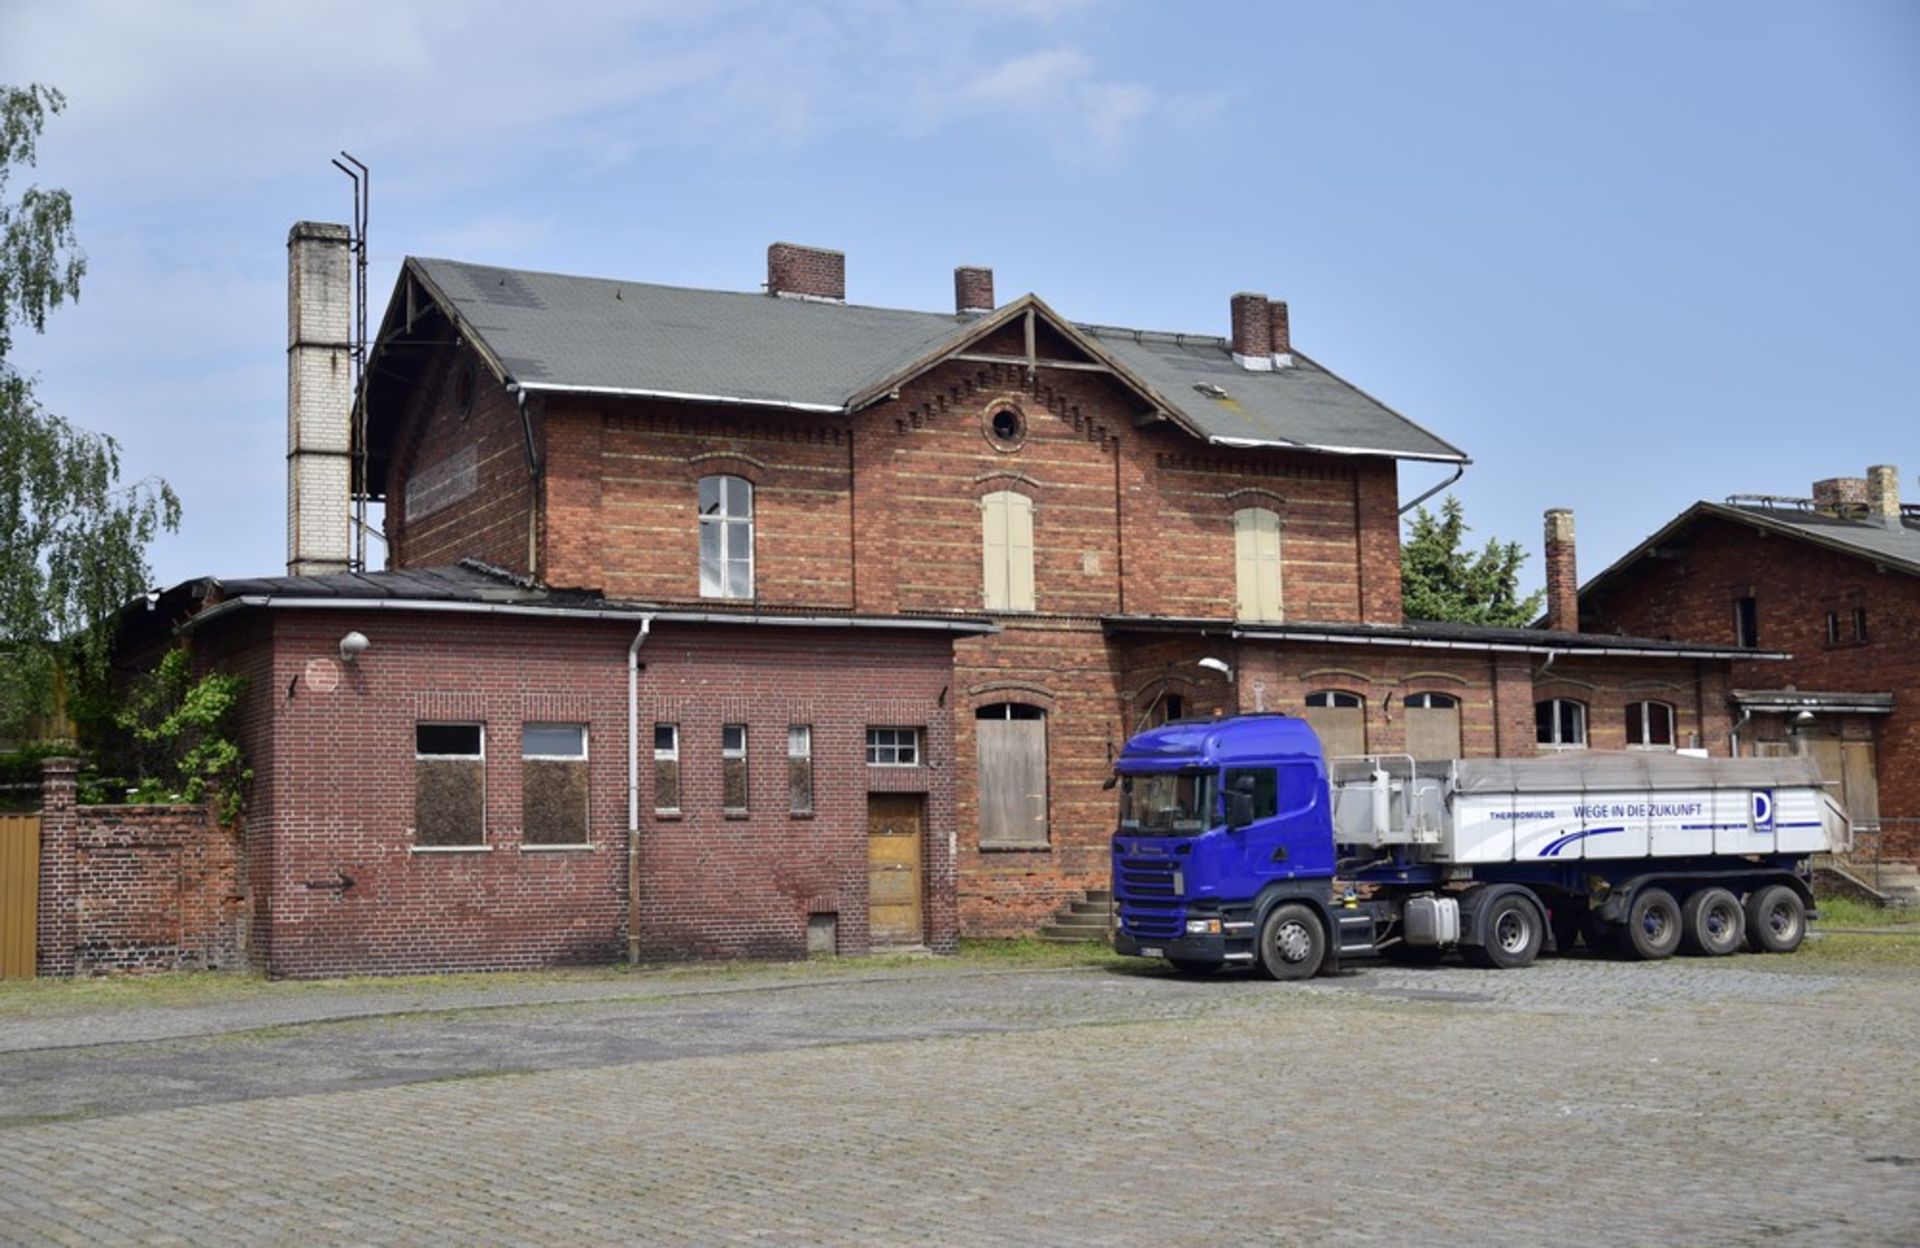 STATION HOUSE, GOODS SHED, OVER ONE ACRE Tangerhütte, Saxony, Germany, - Image 2 of 98